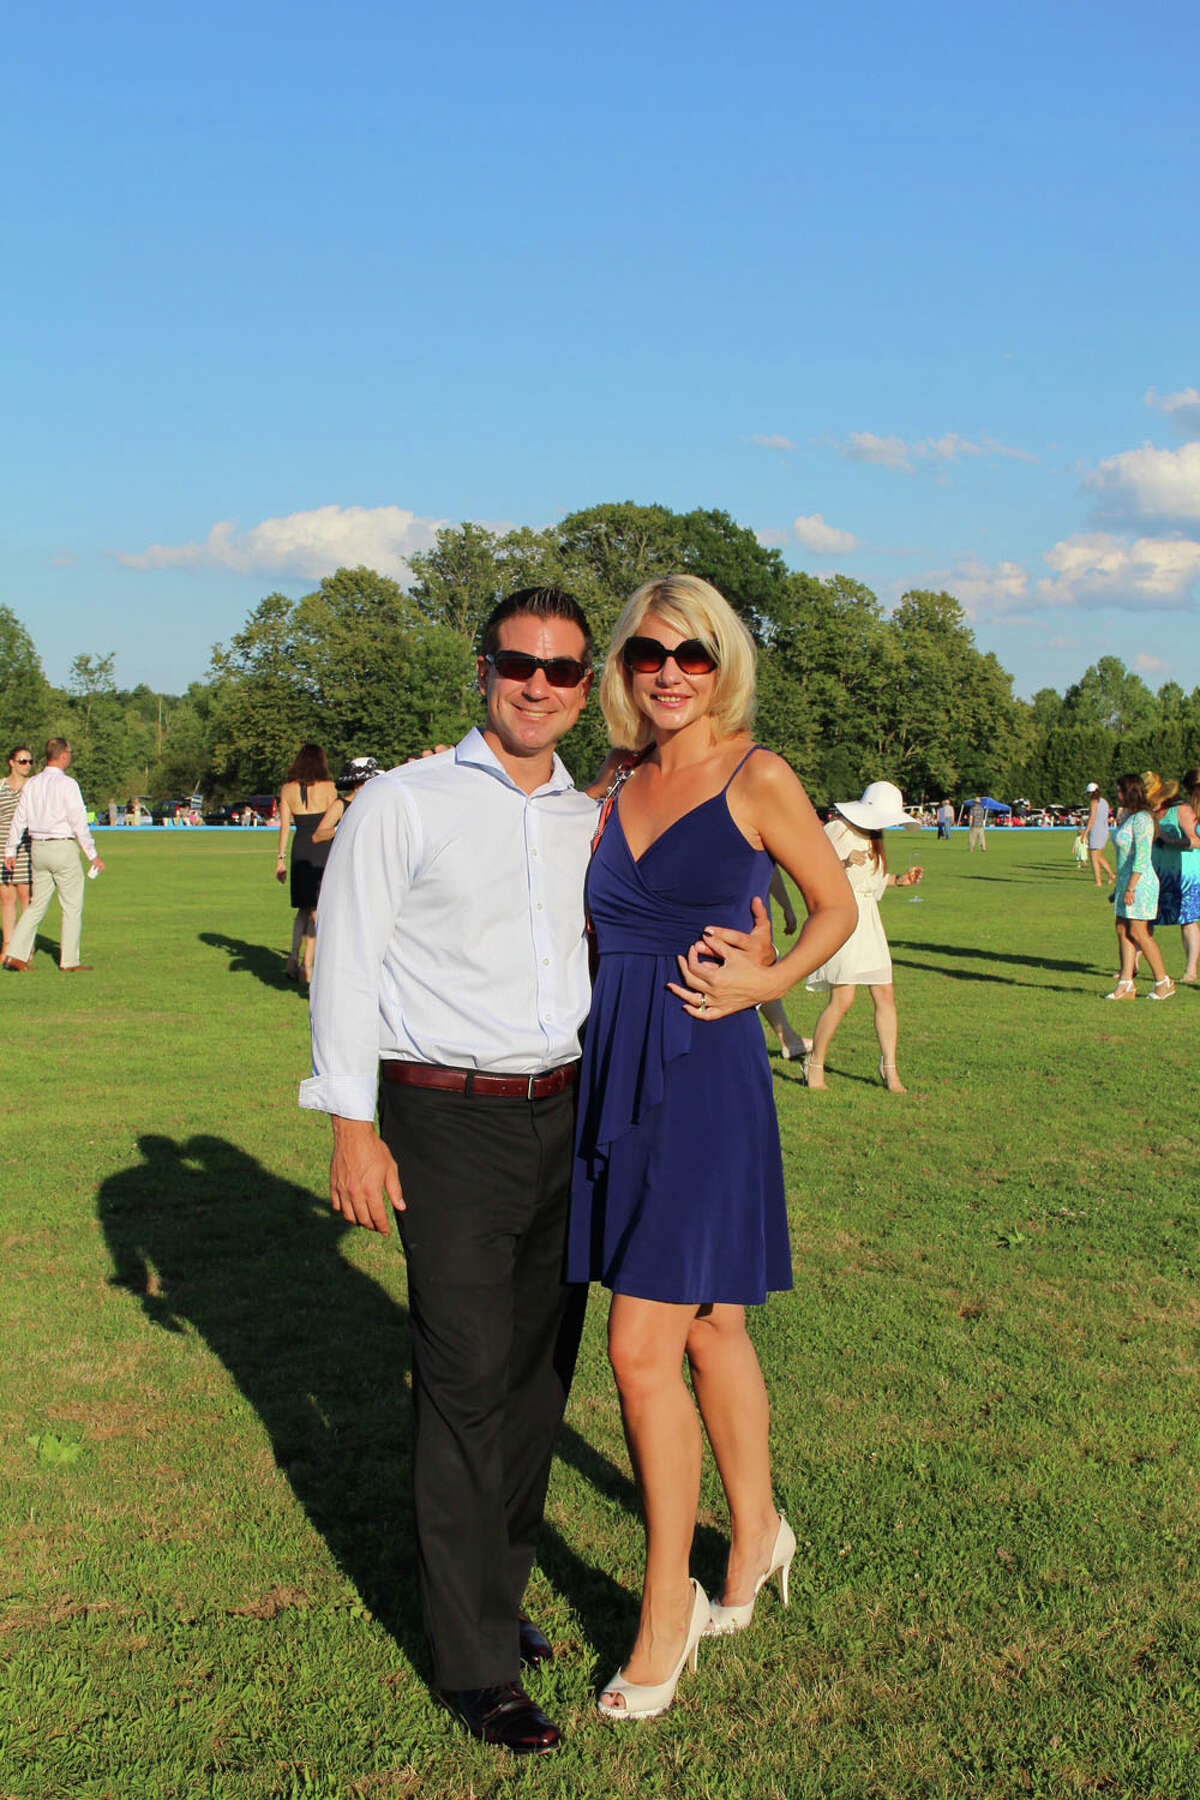 Were you Seen at the Saratoga Centennial Match Cup Party at Saratoga Polo Grounds on Sunday, Aug. 2, 2015?